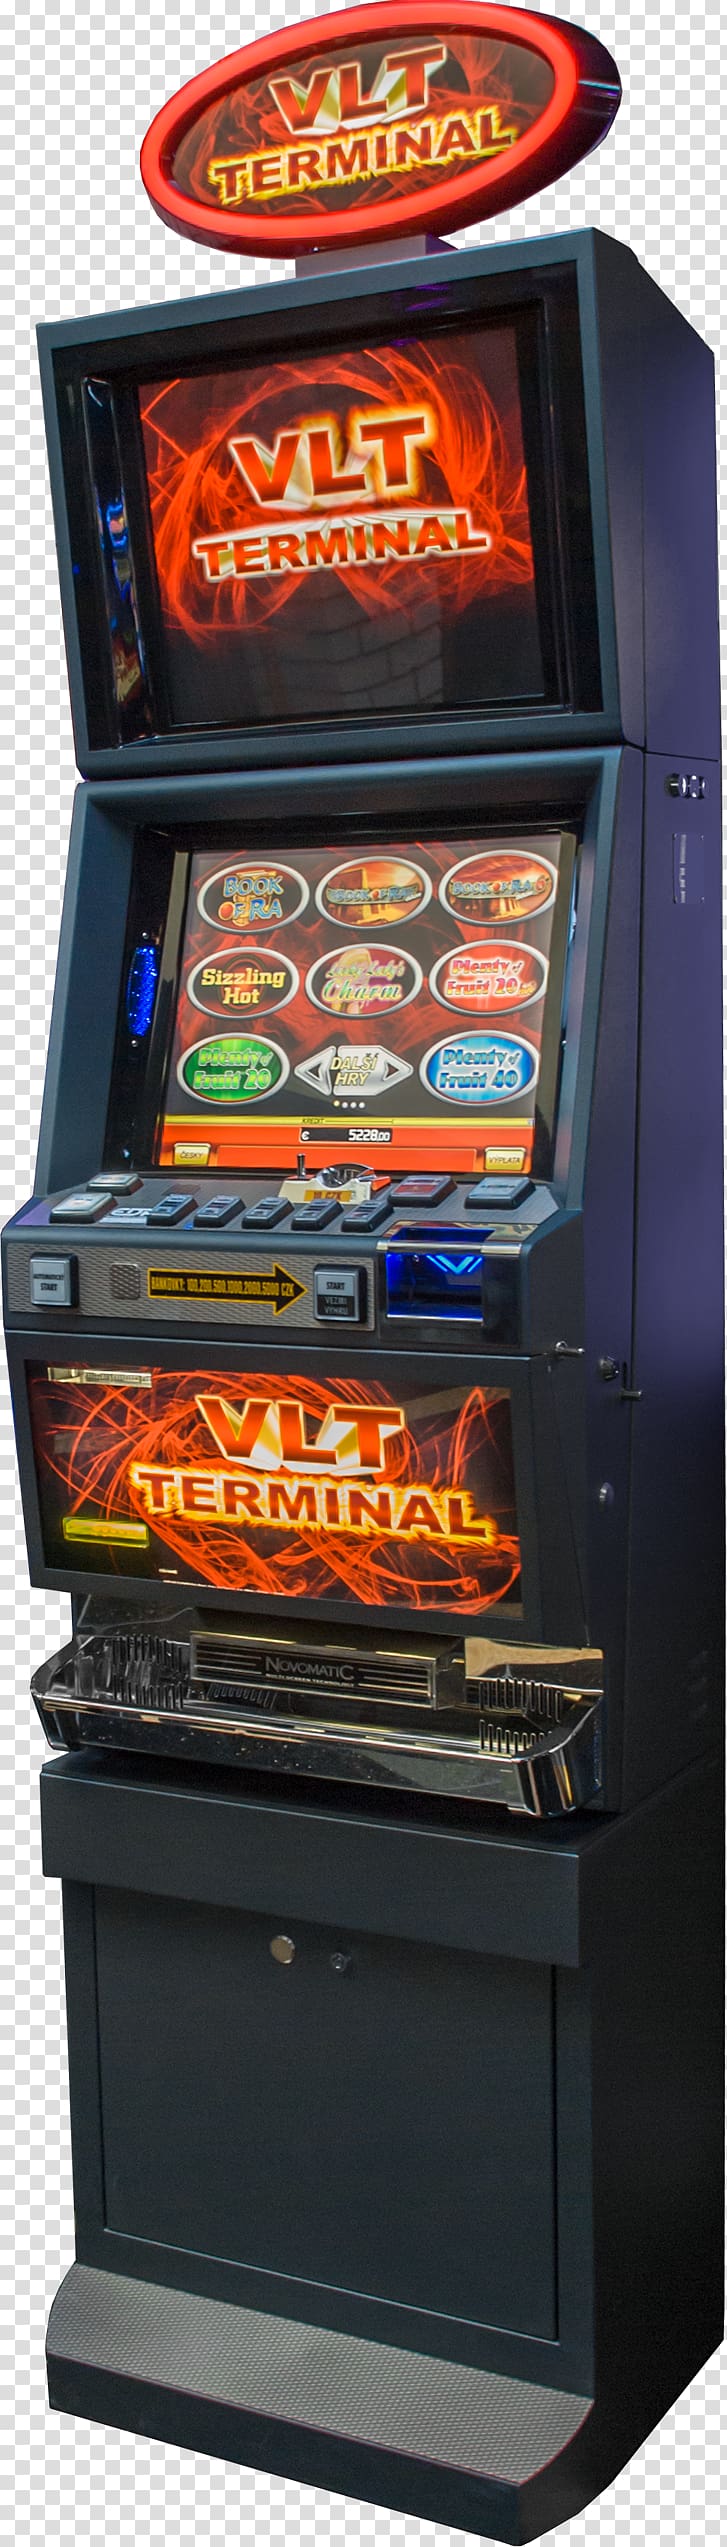 Game Video lottery terminal Lottery machine Goldstar Events, Hot Blast transparent background PNG clipart